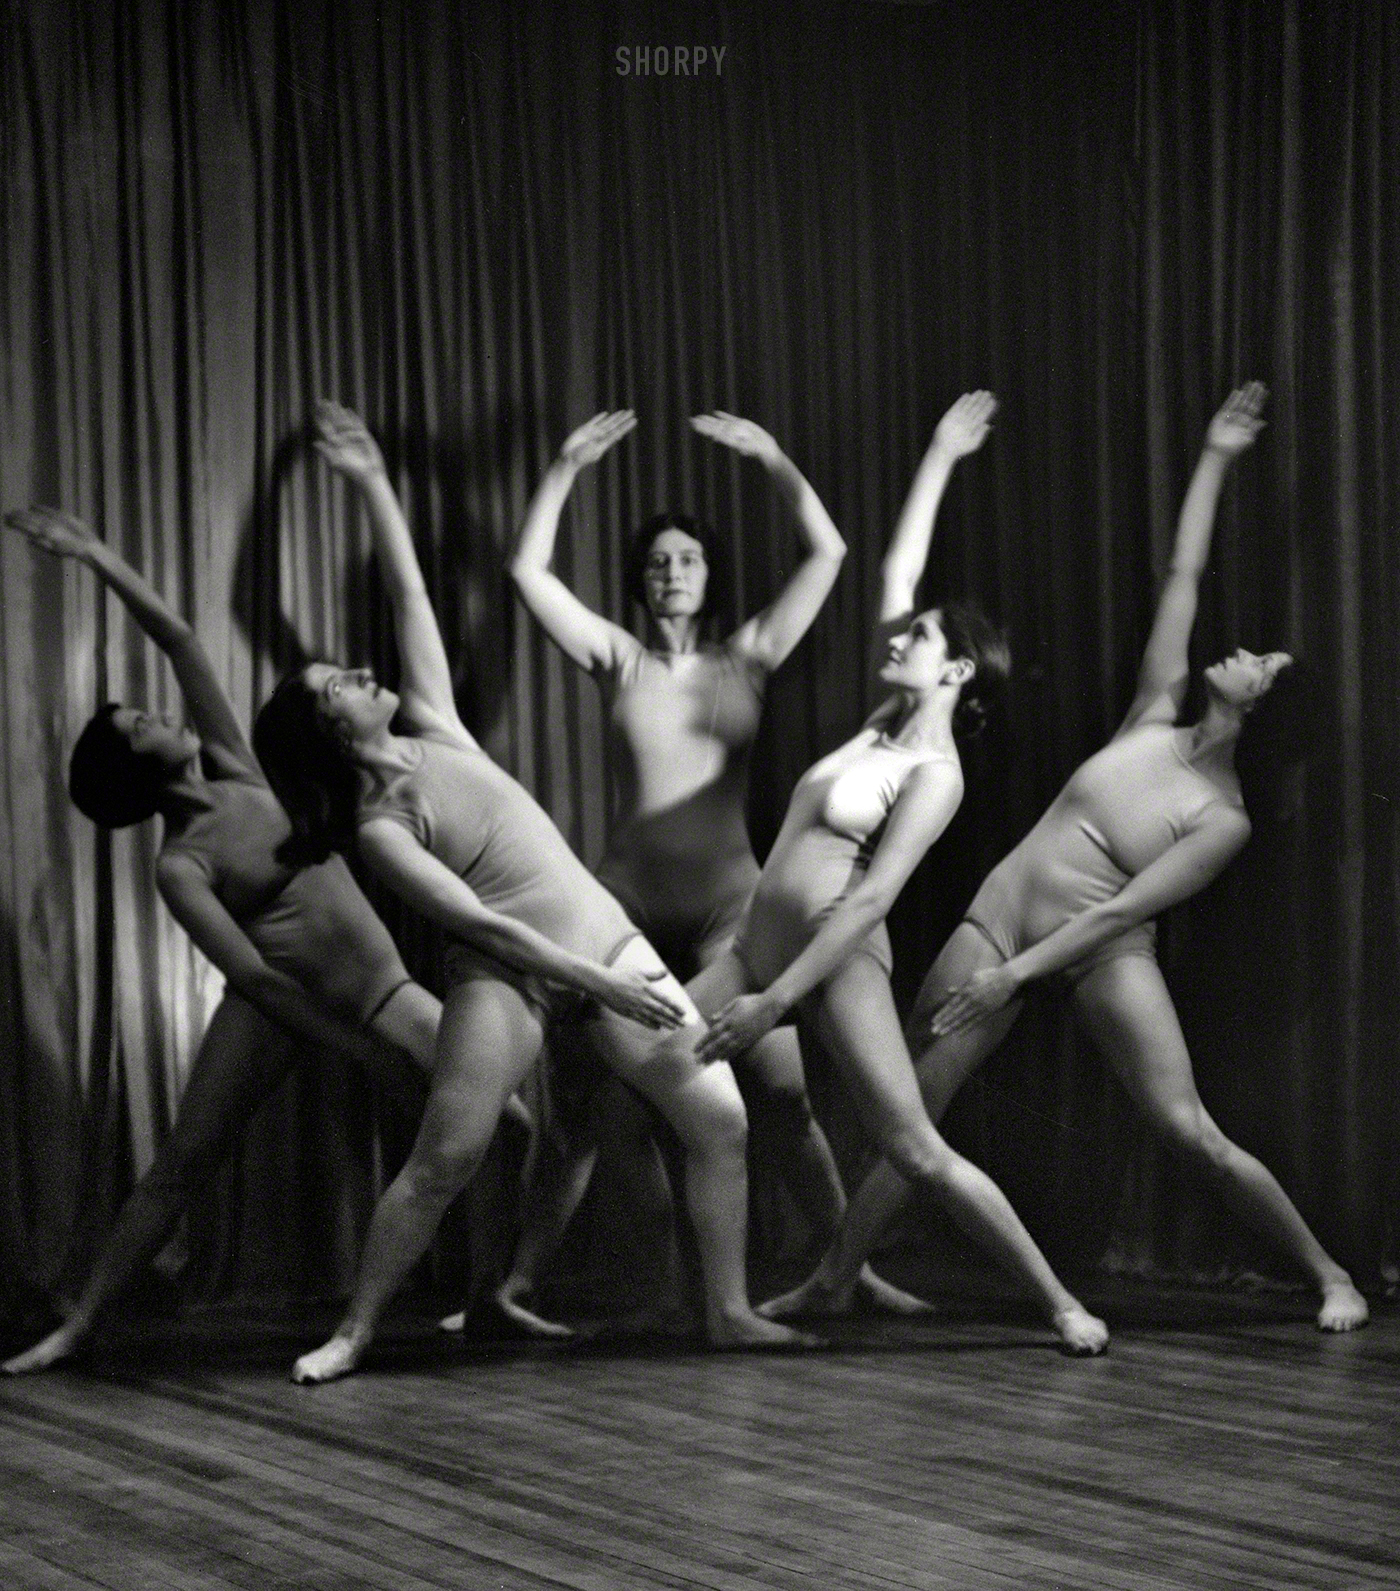 April 25, 1930. New York. "Choreographer Sarah Mildred Strauss and pupils." Cue "Rhapsody in Gray." Nitrate negative by Arnold Genthe. View full size.